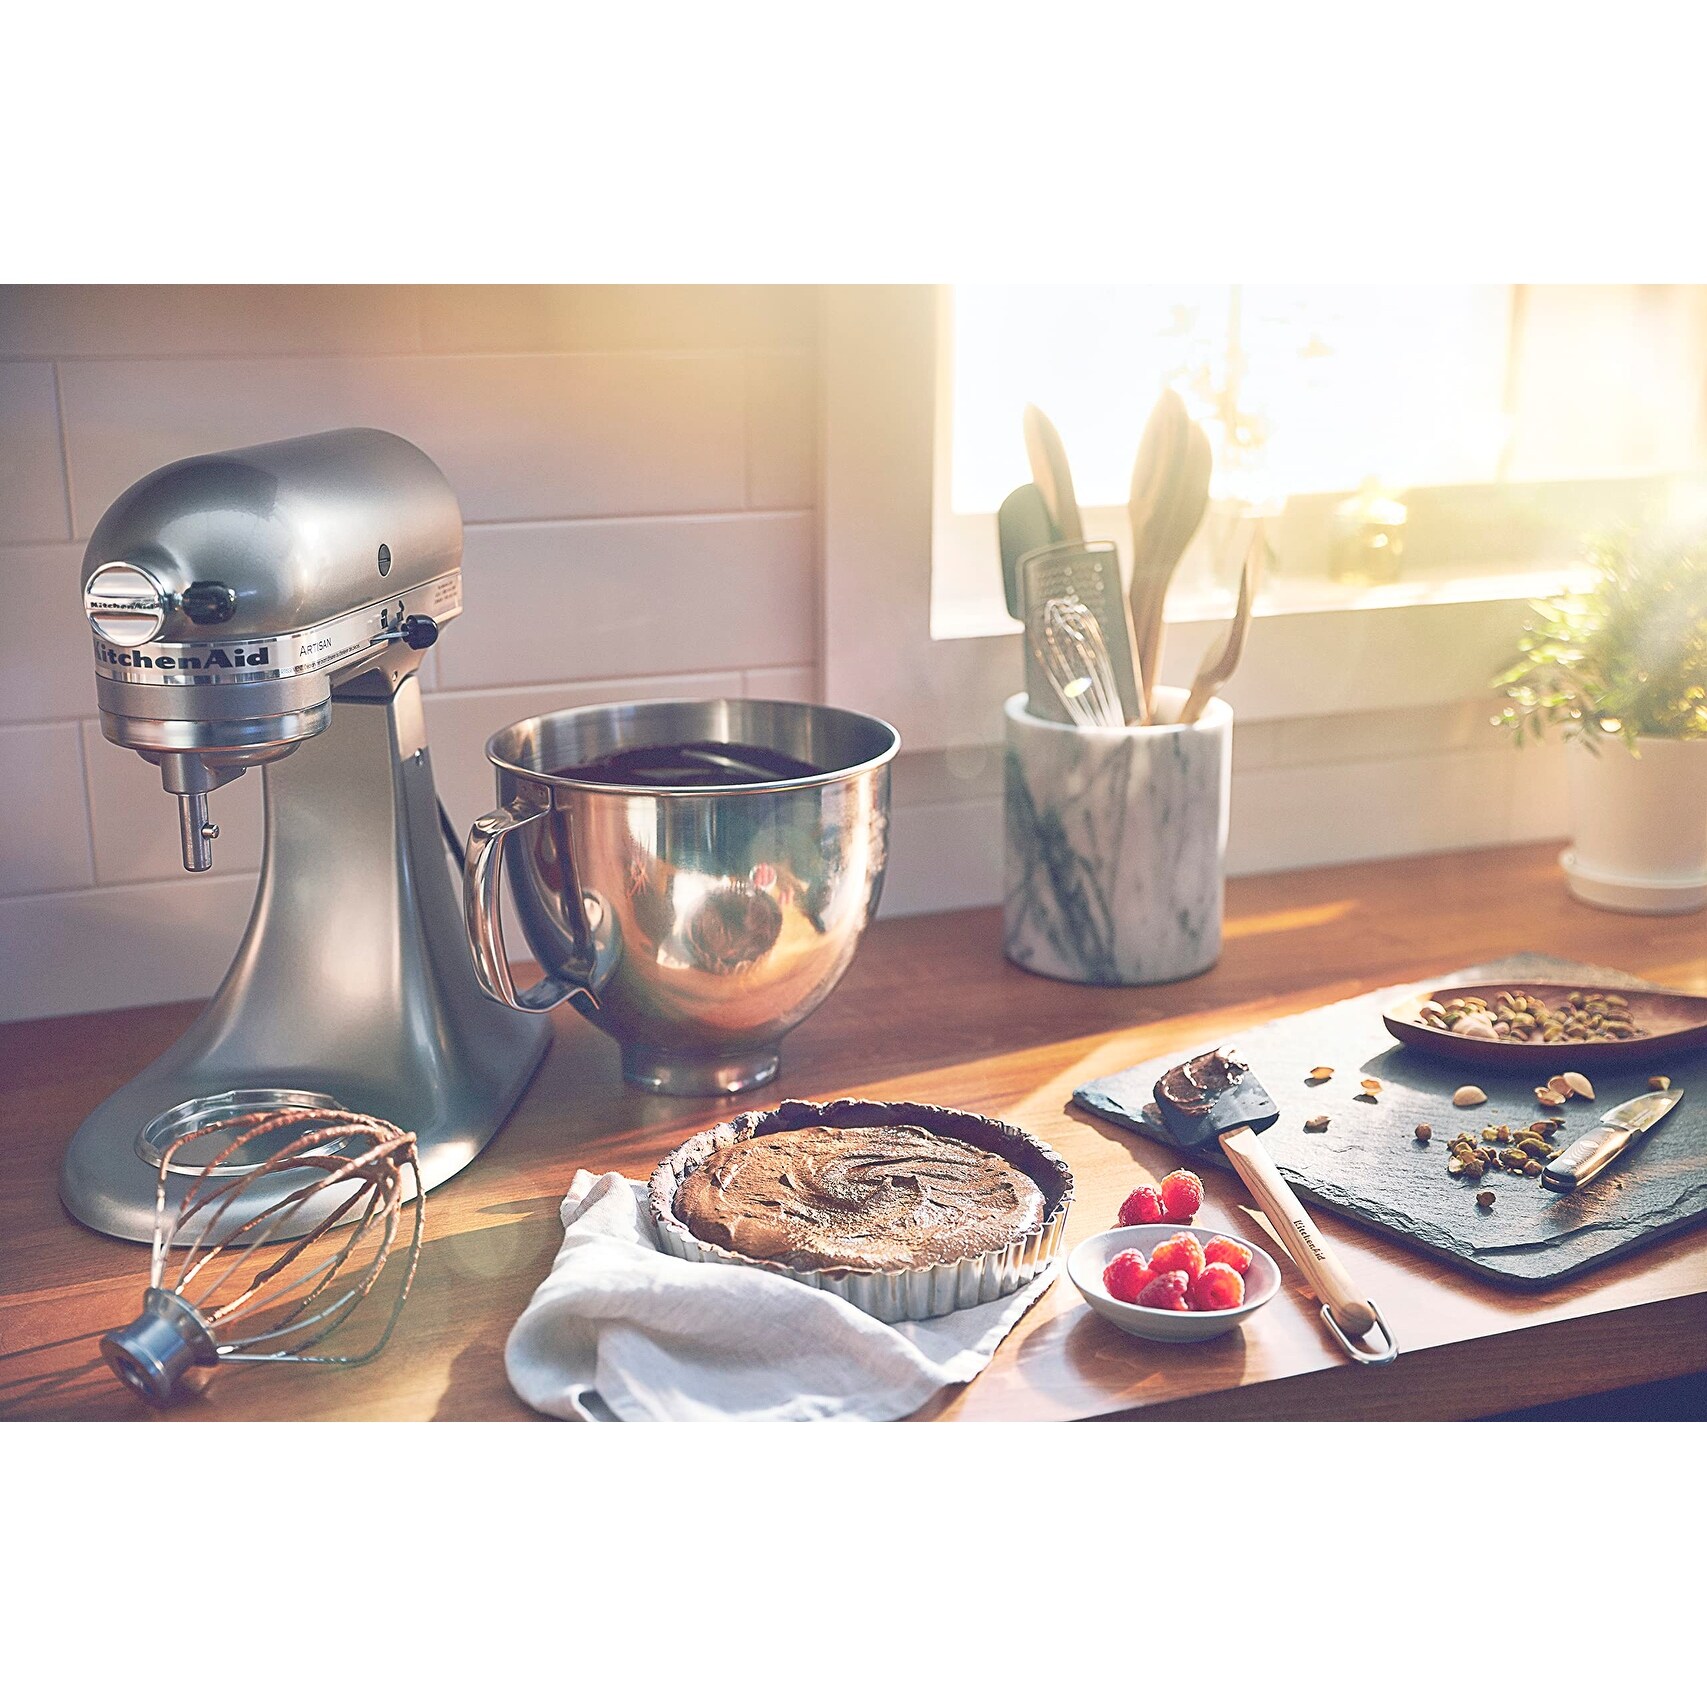 https://ak1.ostkcdn.com/images/products/is/images/direct/66025f13e81b8a8aa02bb53e3030c8b901f2adb2/Artisan-Series-5-Quart-Tilt-Head-Stand-Mixer-with-Pouring-Shield%2C-Removable-bowl.jpg